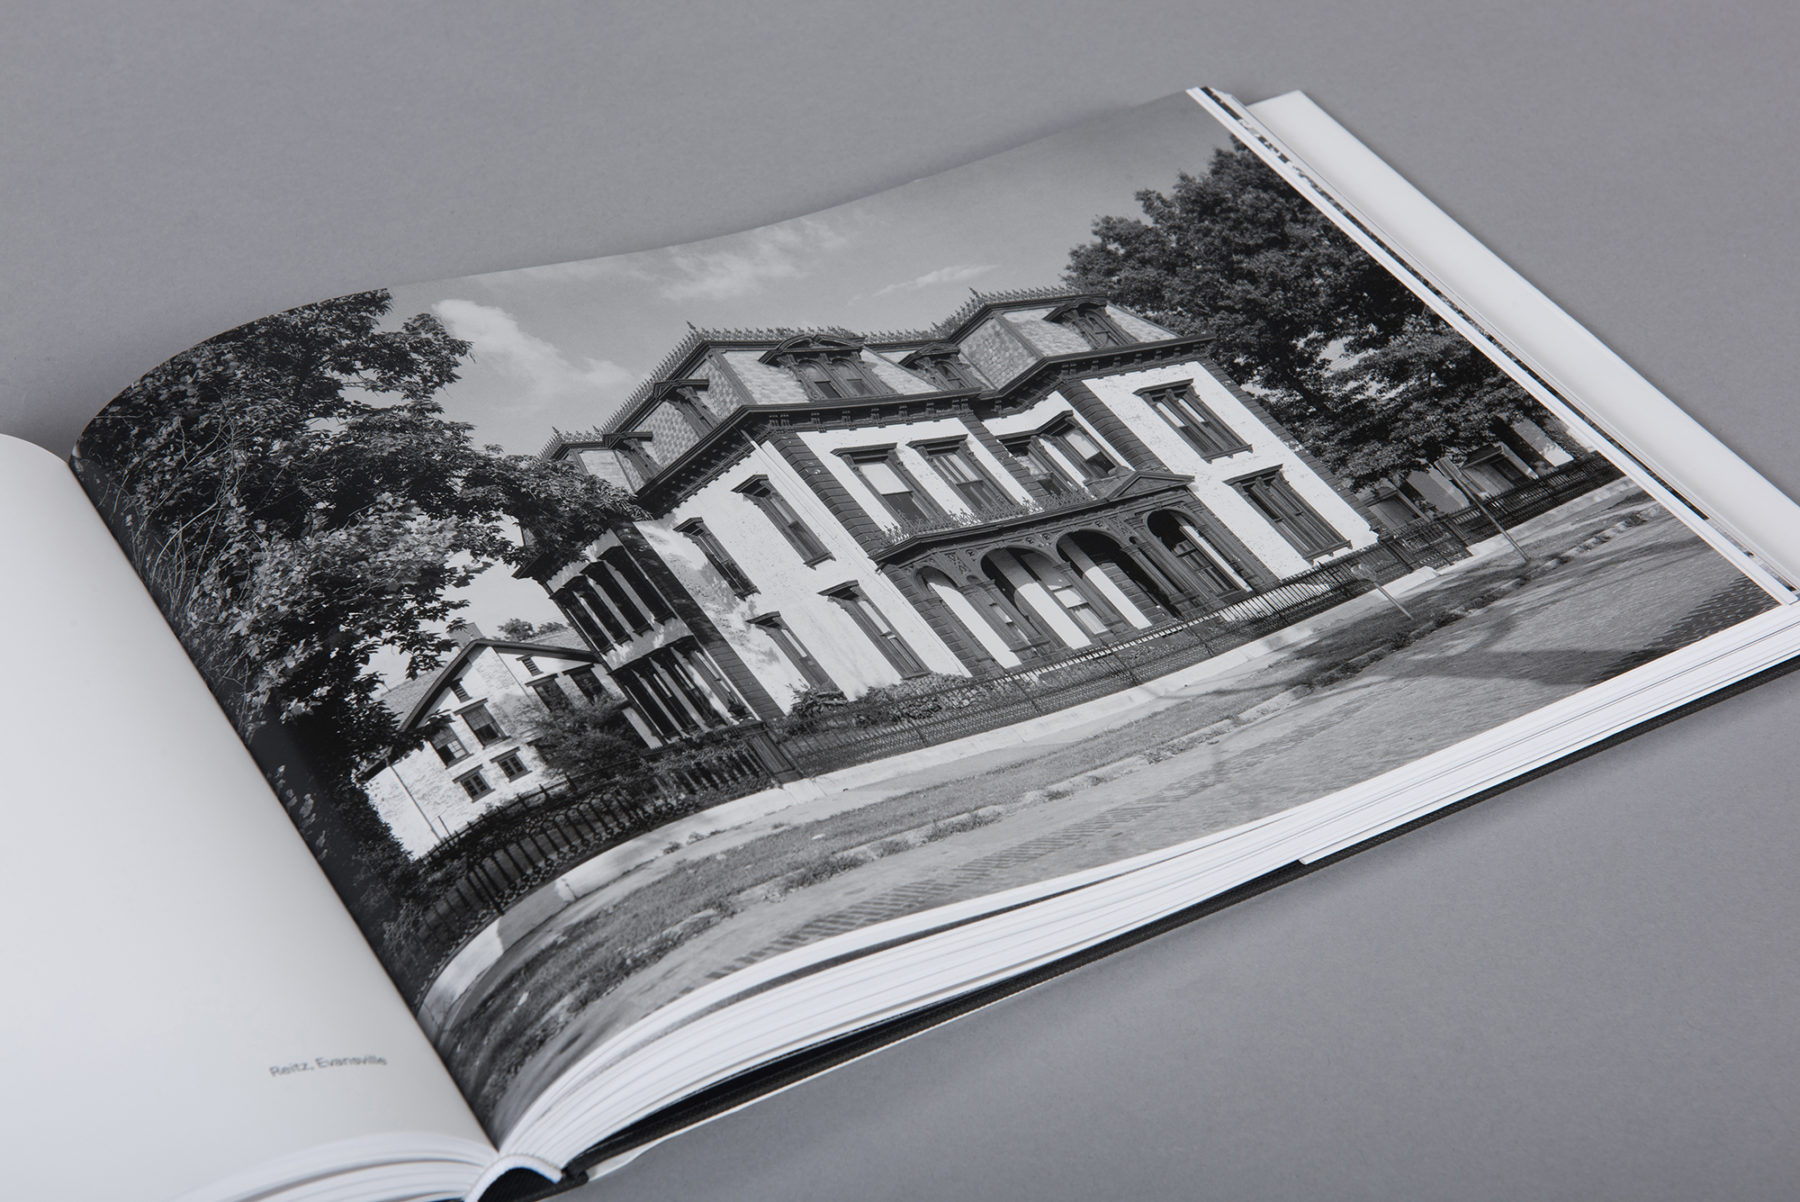 Open page of the book with a photo of the exterior of a historic home in Indiana